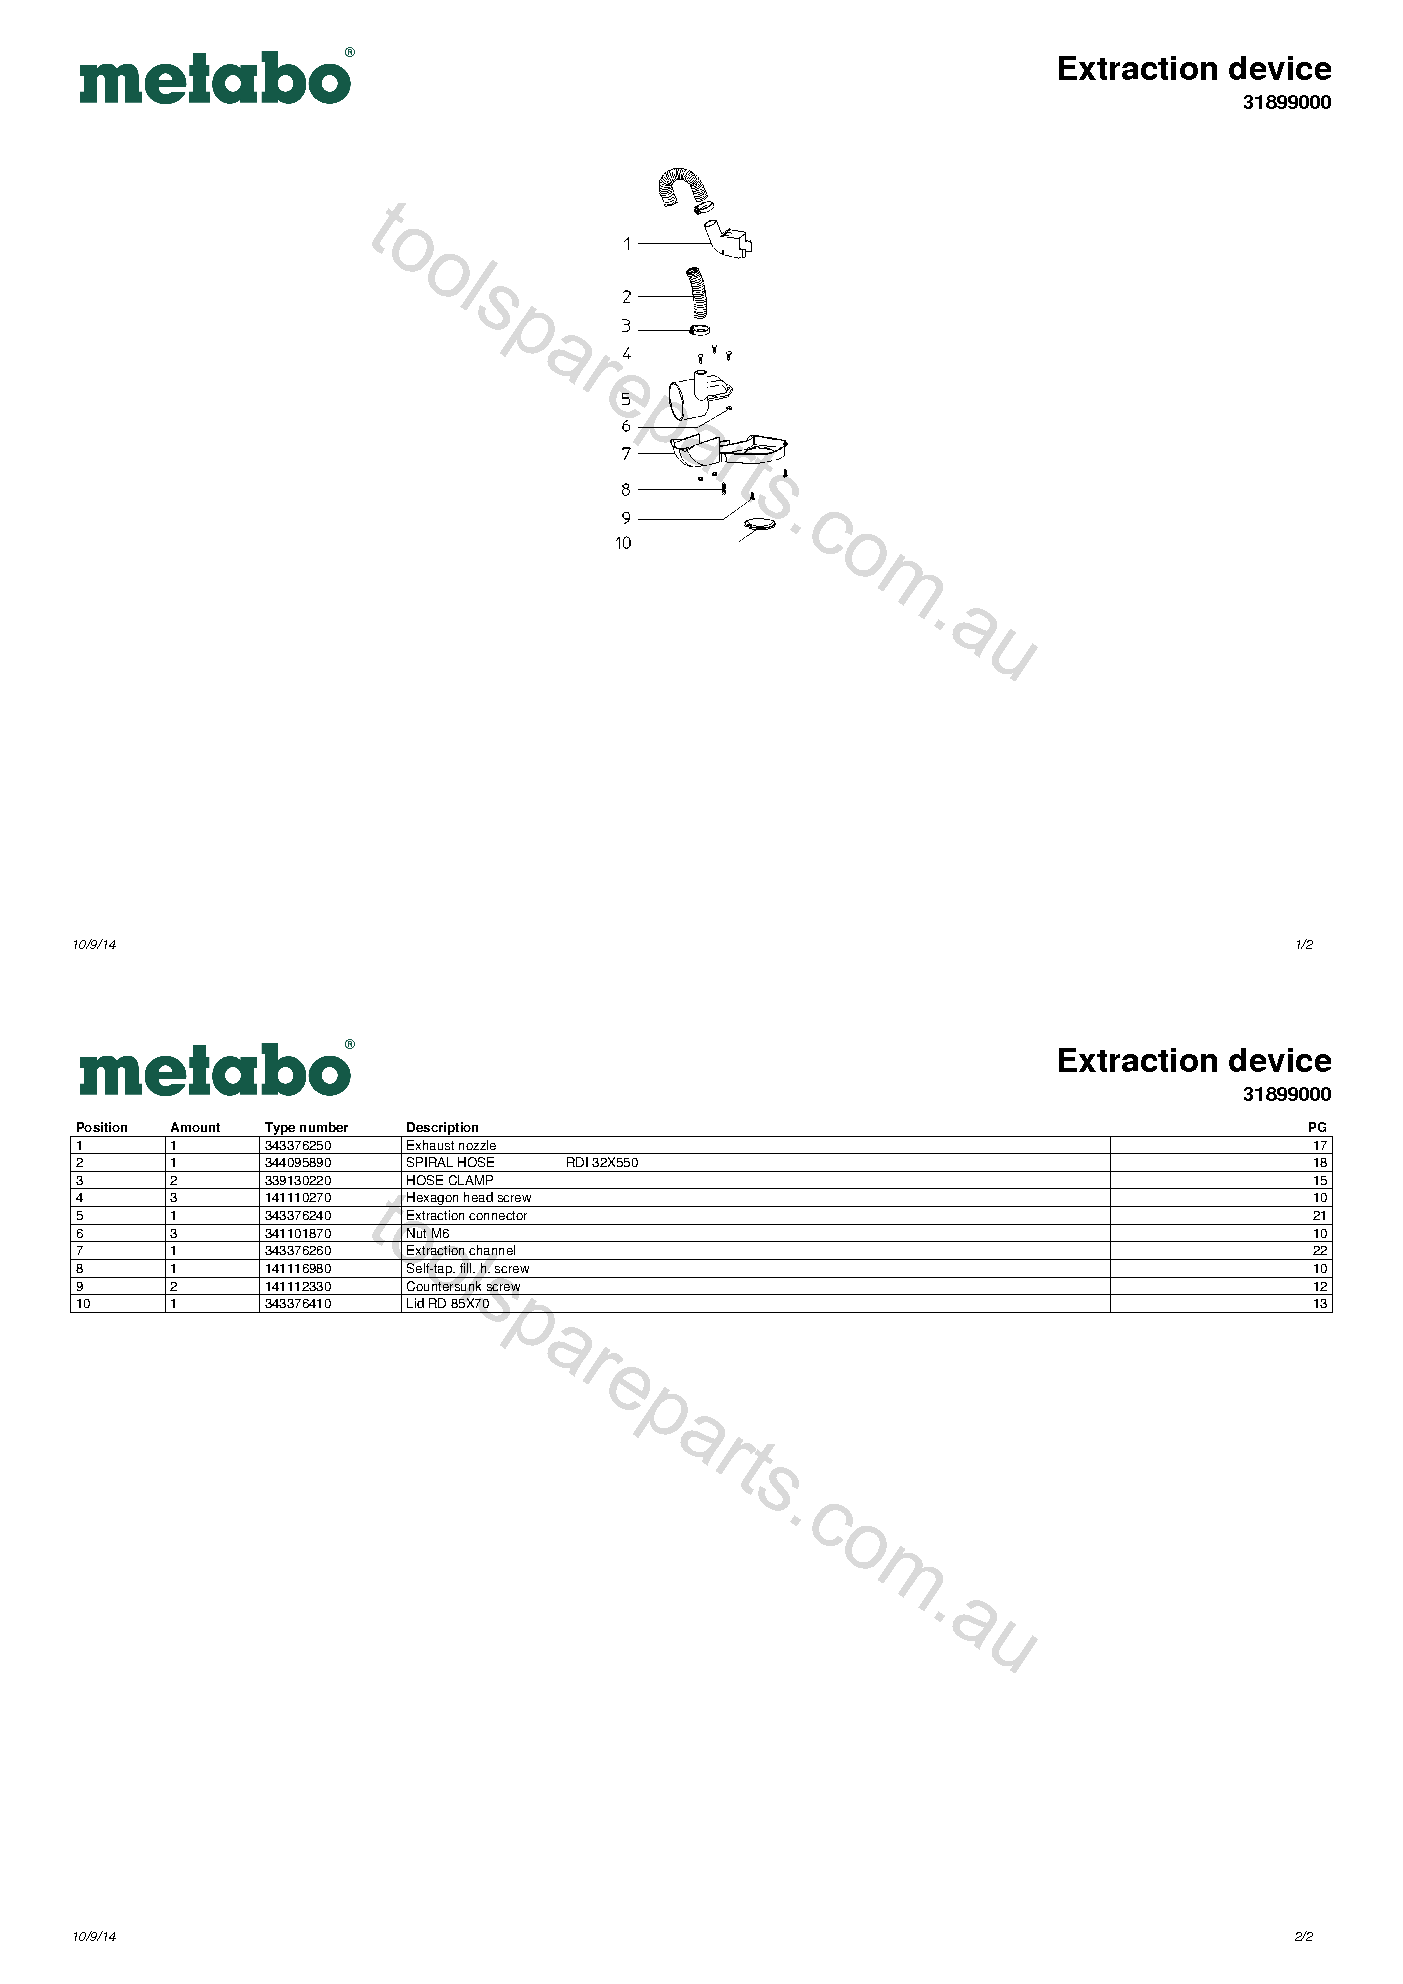 Metabo Extraction device 31899000  Diagram 1